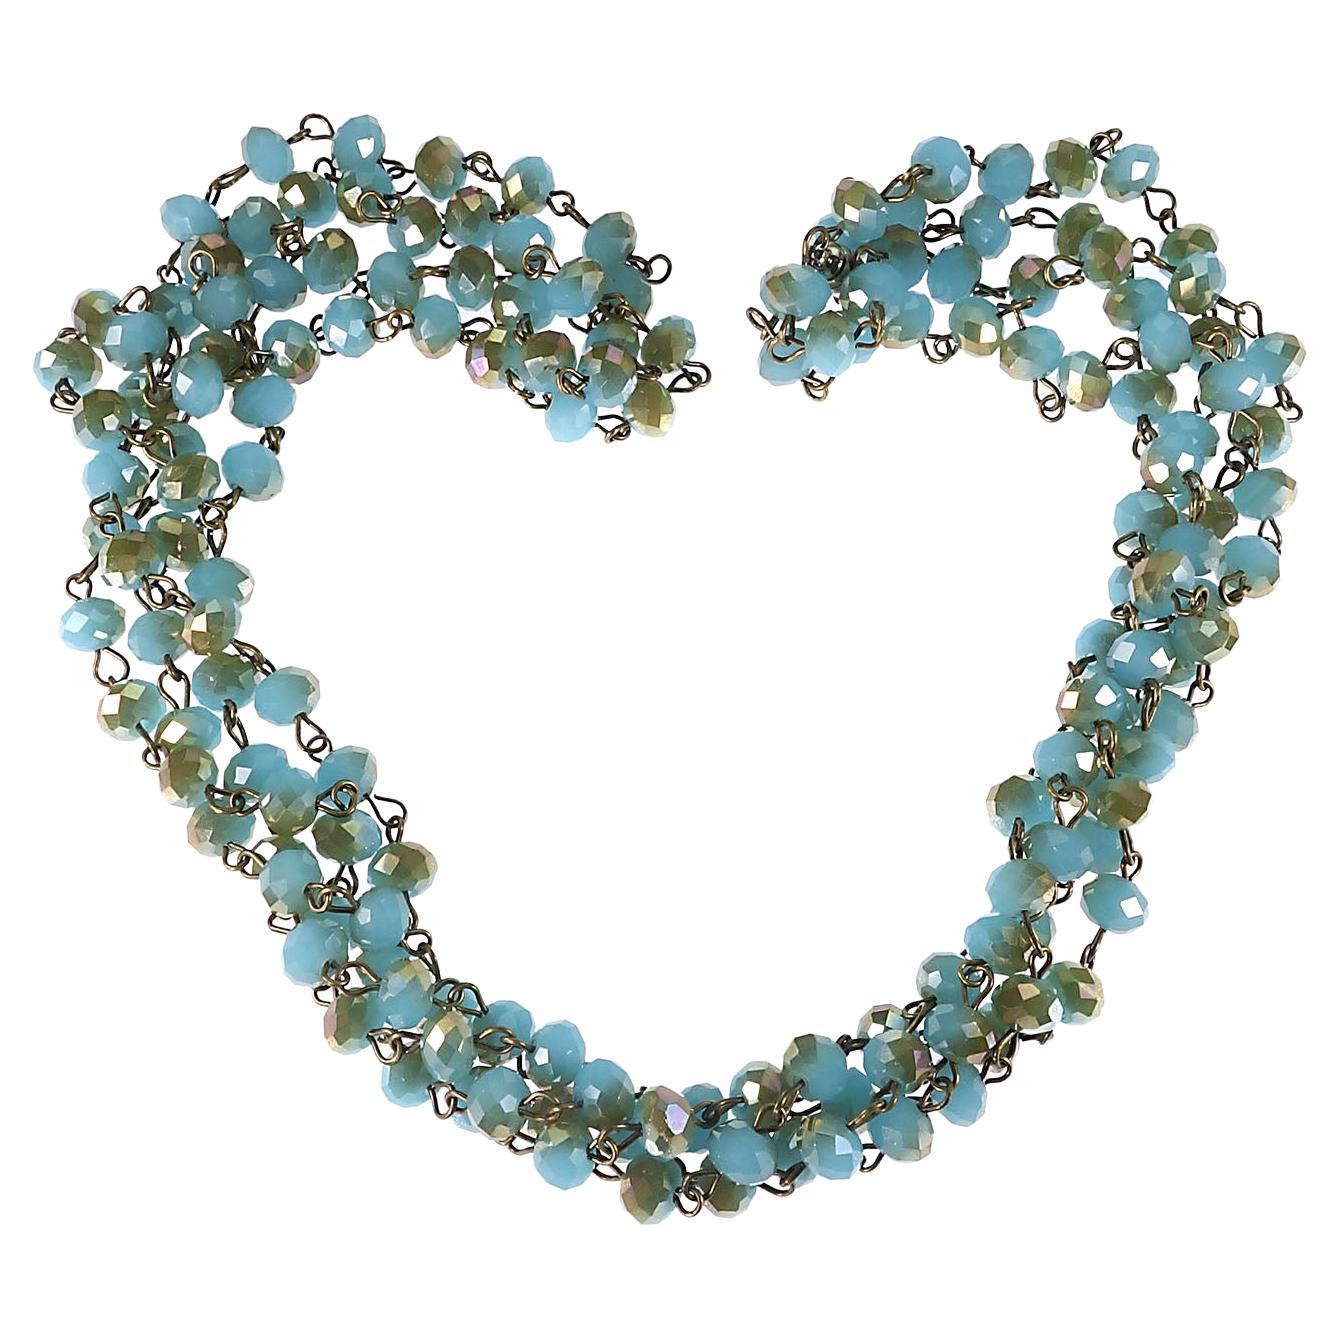 AJD Teal / Bronzy Crystal Bead Necklace  Great Gift! For Sale